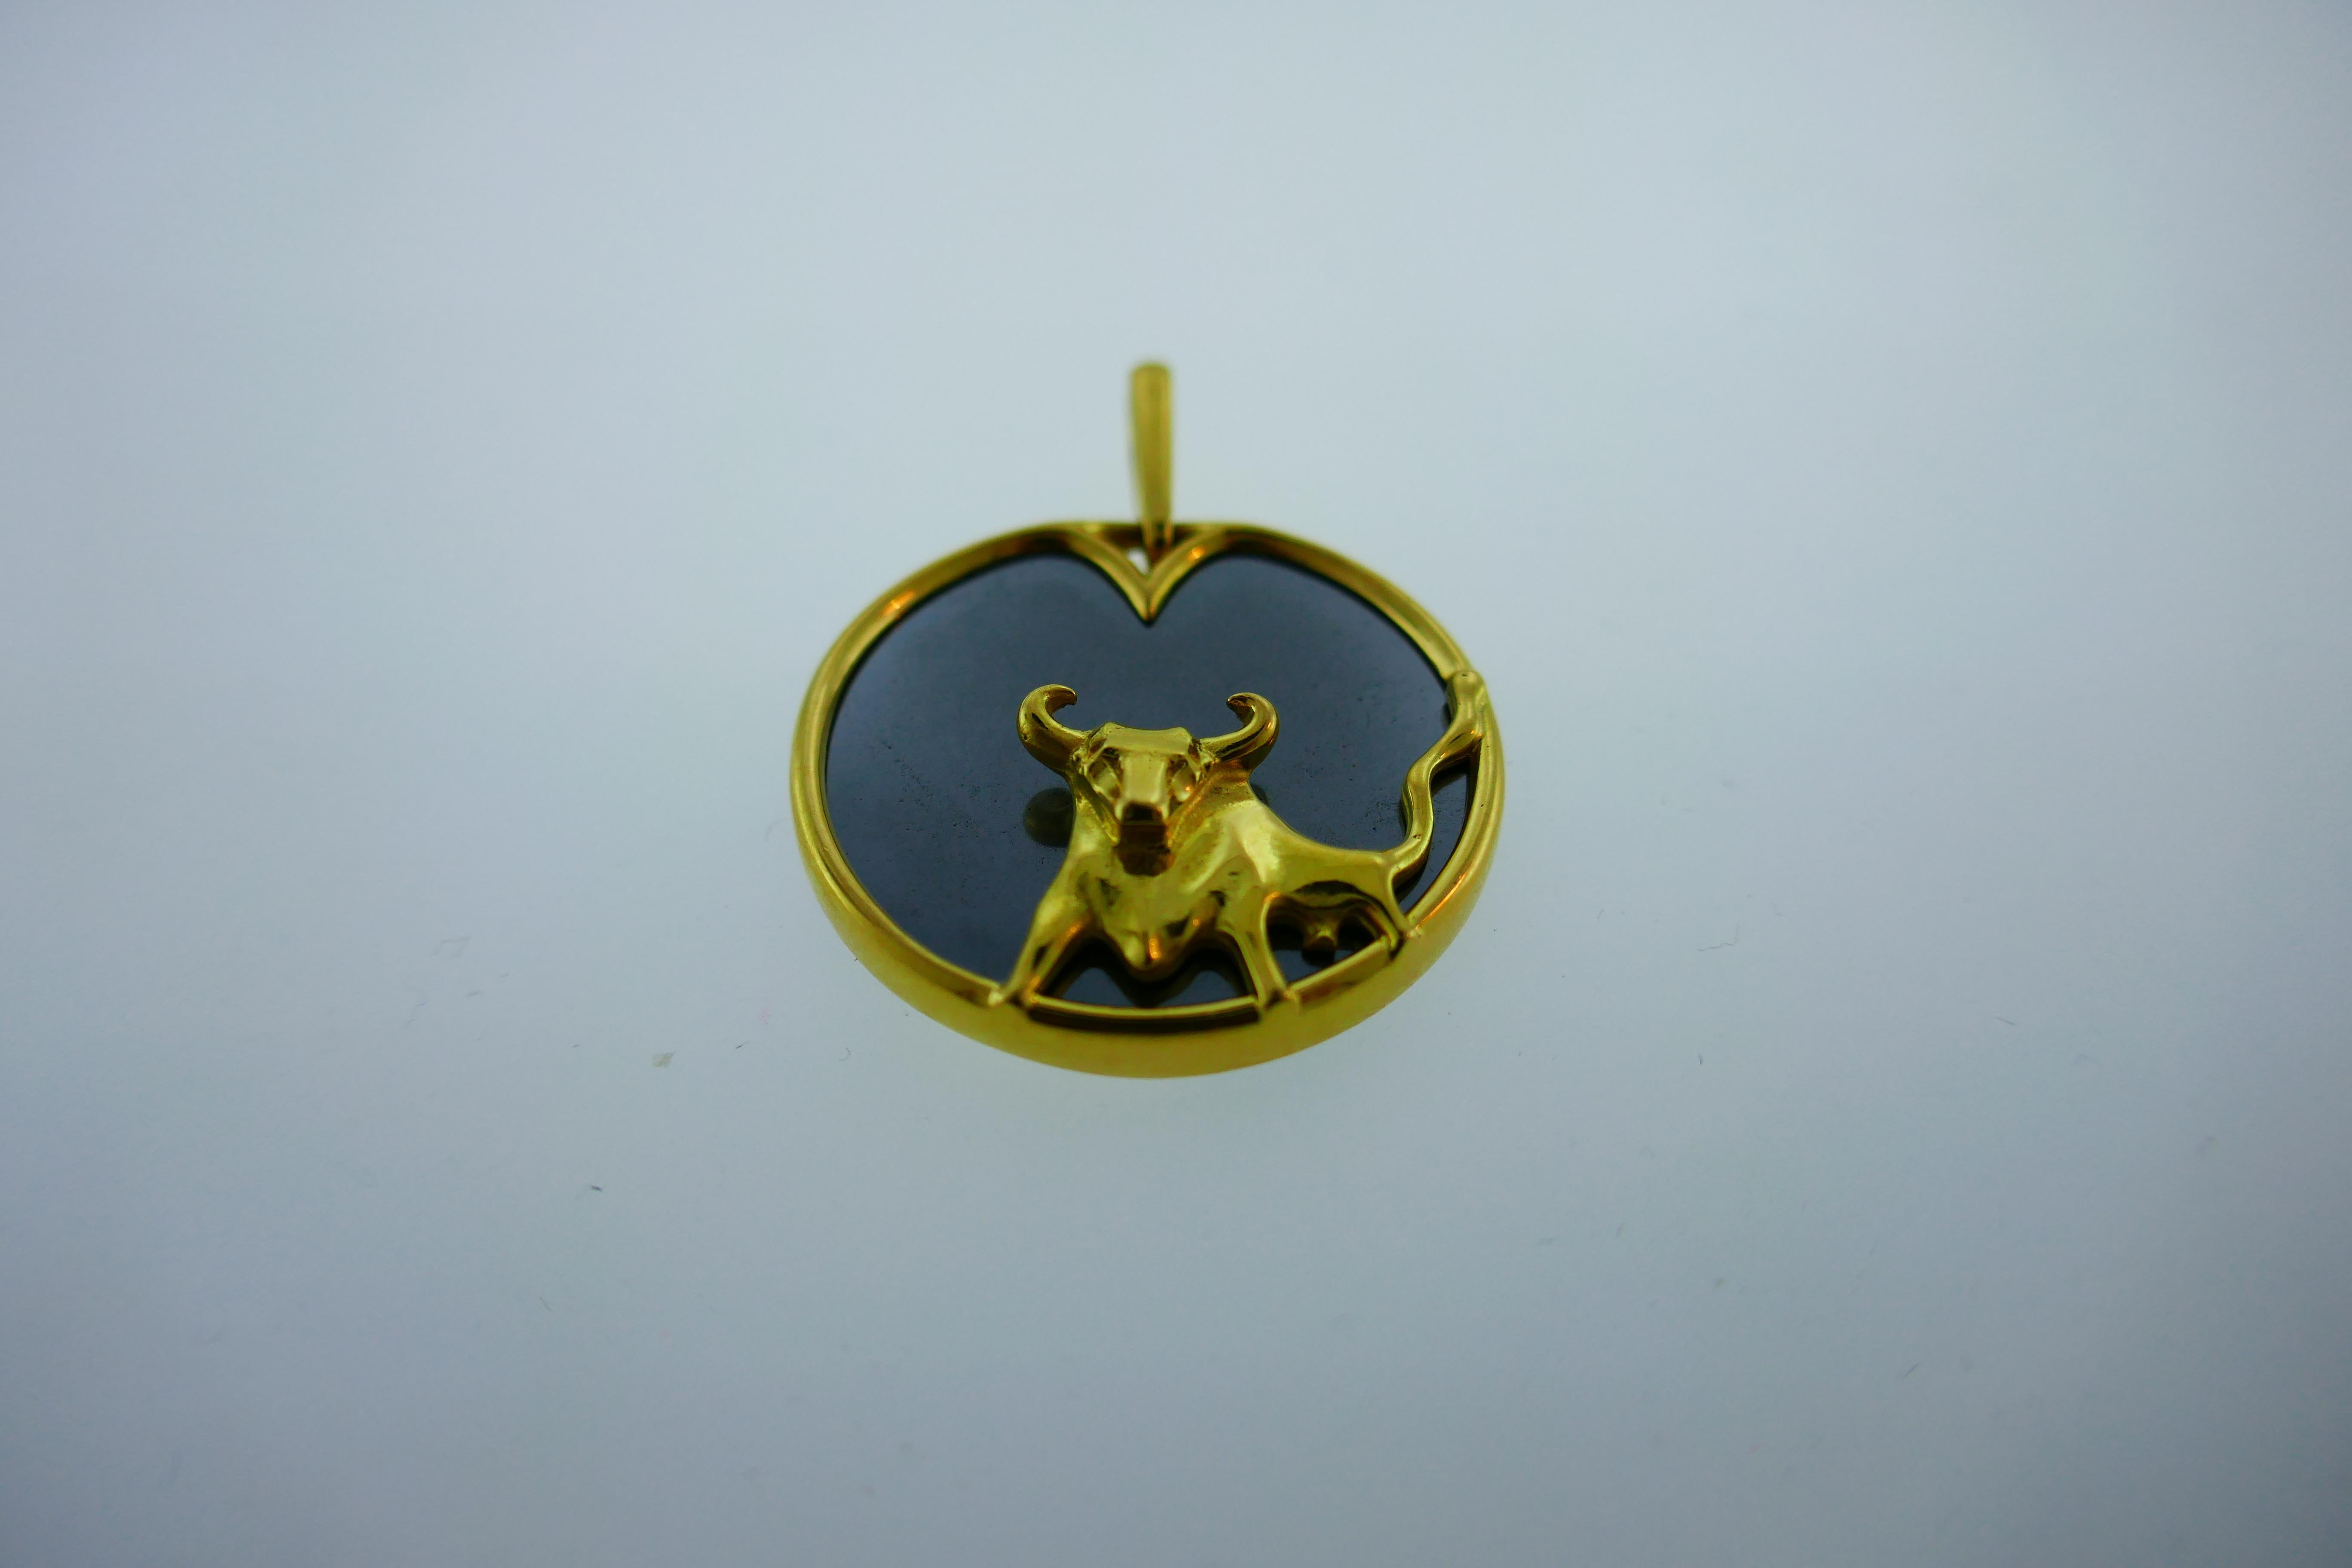 Here is your chance to purchase a beautiful and highly collectible designer pendant charm.  Truly a great piece at a great price! 

Weight: 10.1 grams

Dimensions: 3/4